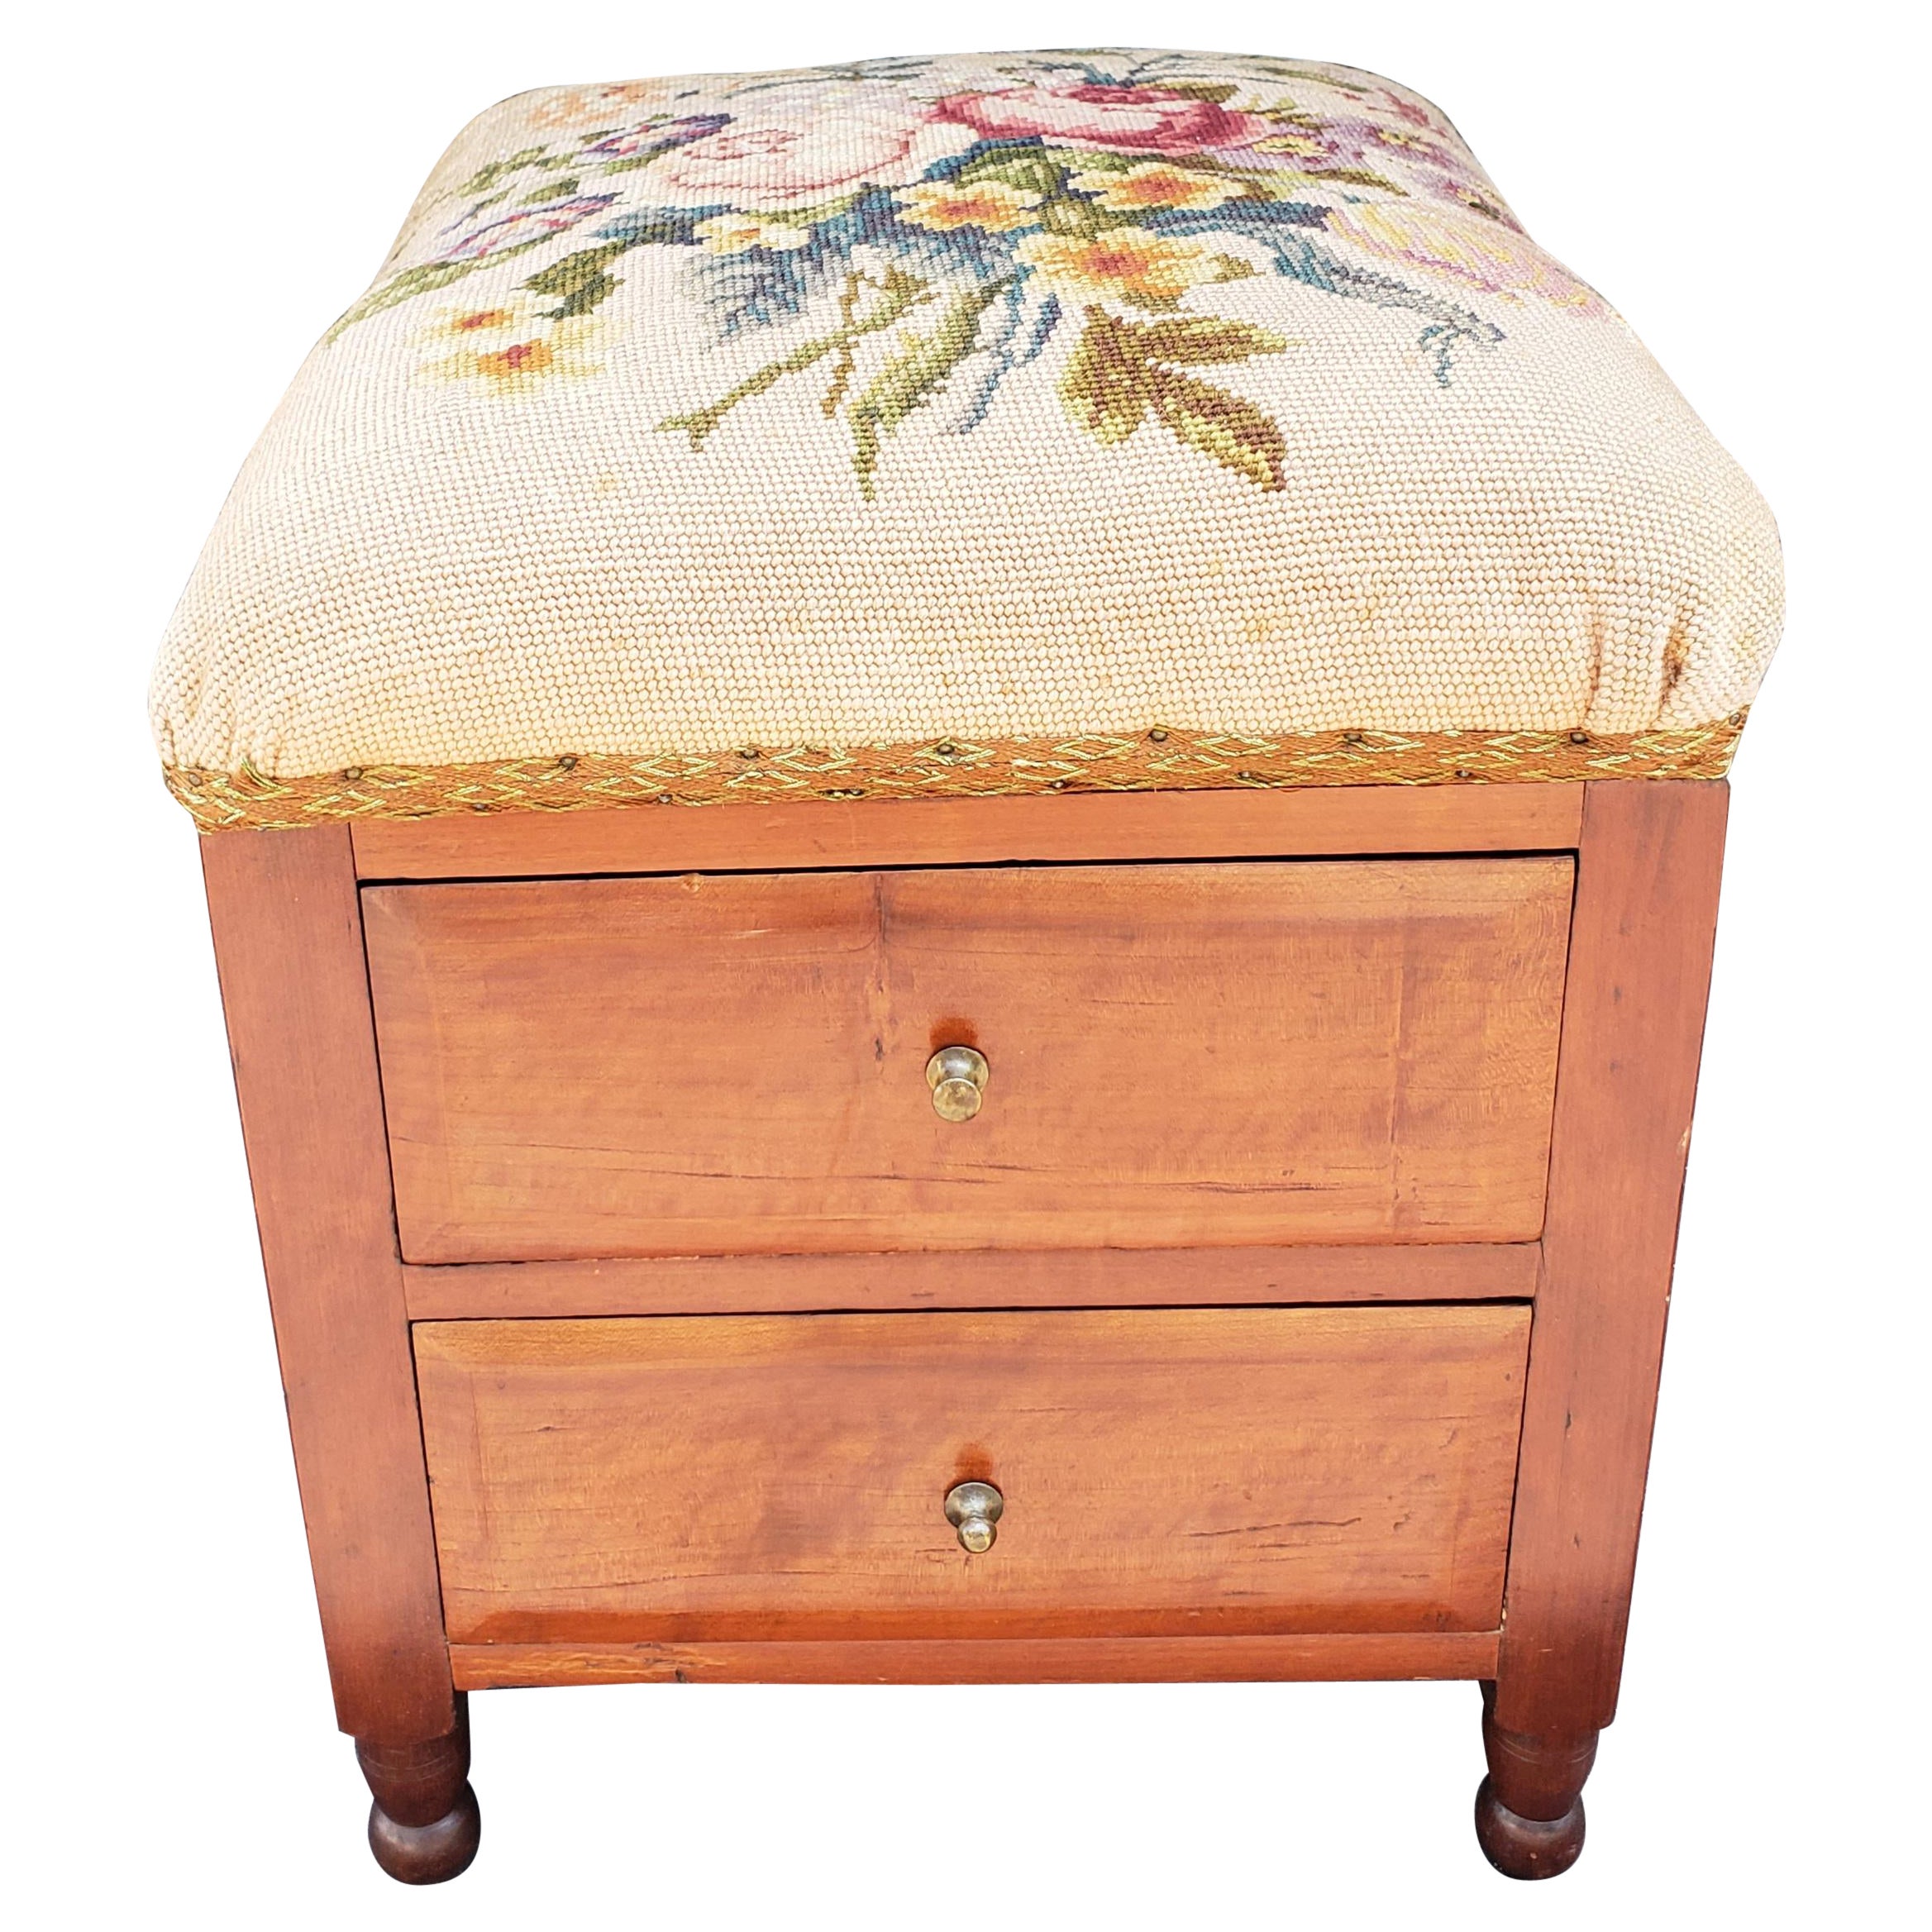 Victorian Two-Drawer Mahogany Needlework Upholstered Stool on Wheels For Sale